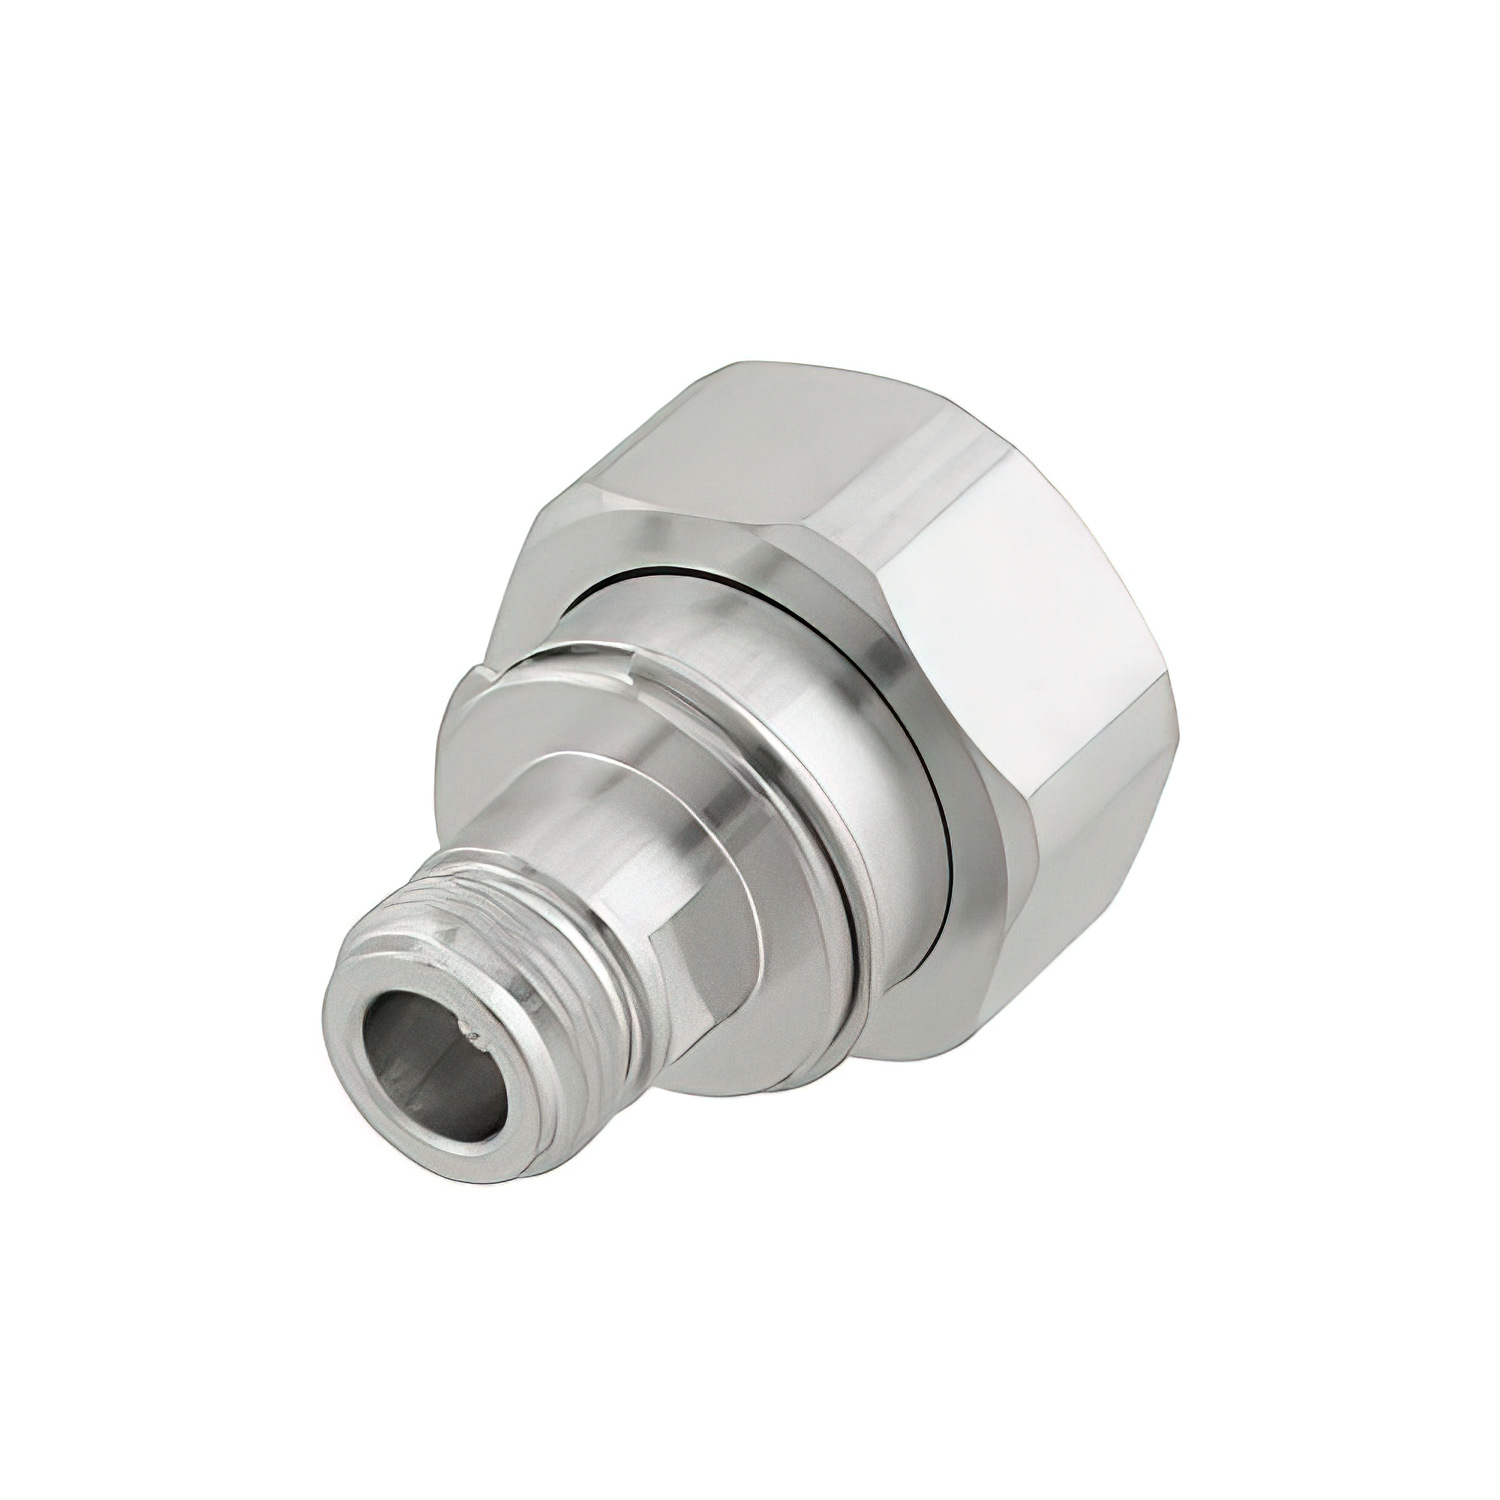 7-16 DIN Male to N Female Adapter 1